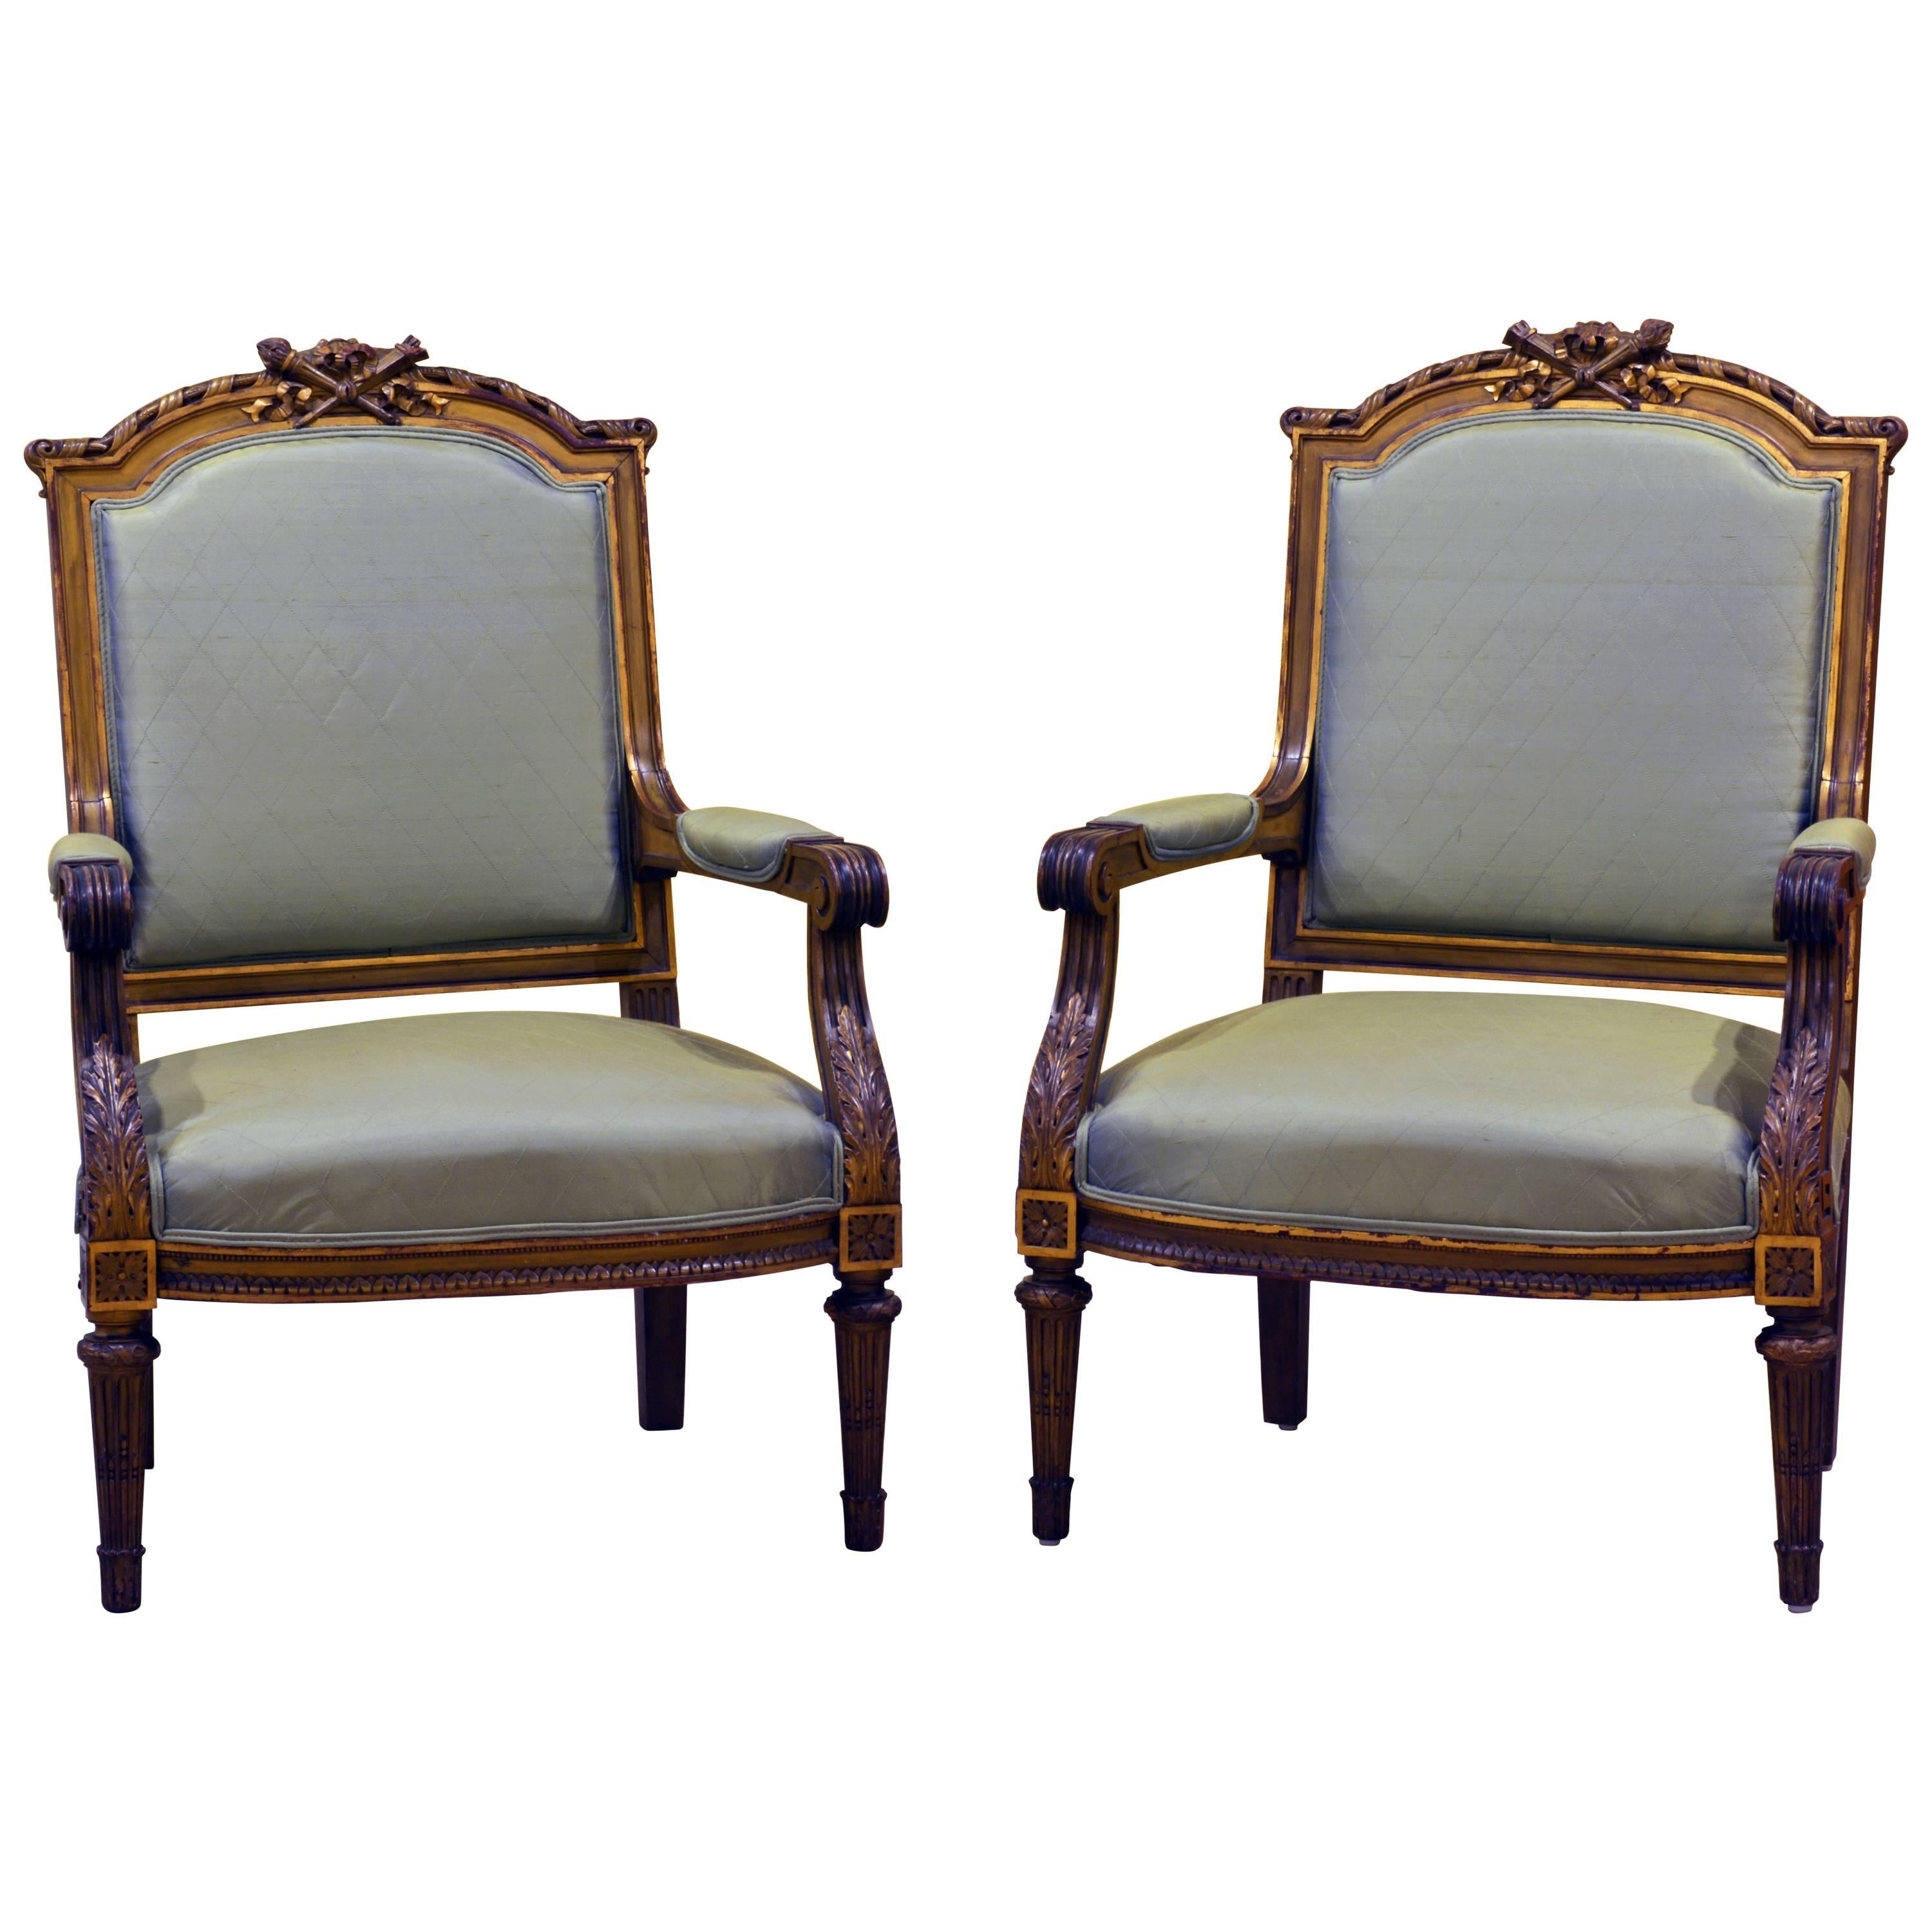 Pair of French, Louis XVI Style Carved and Parcel-Gilt Satin Covered Armchairs